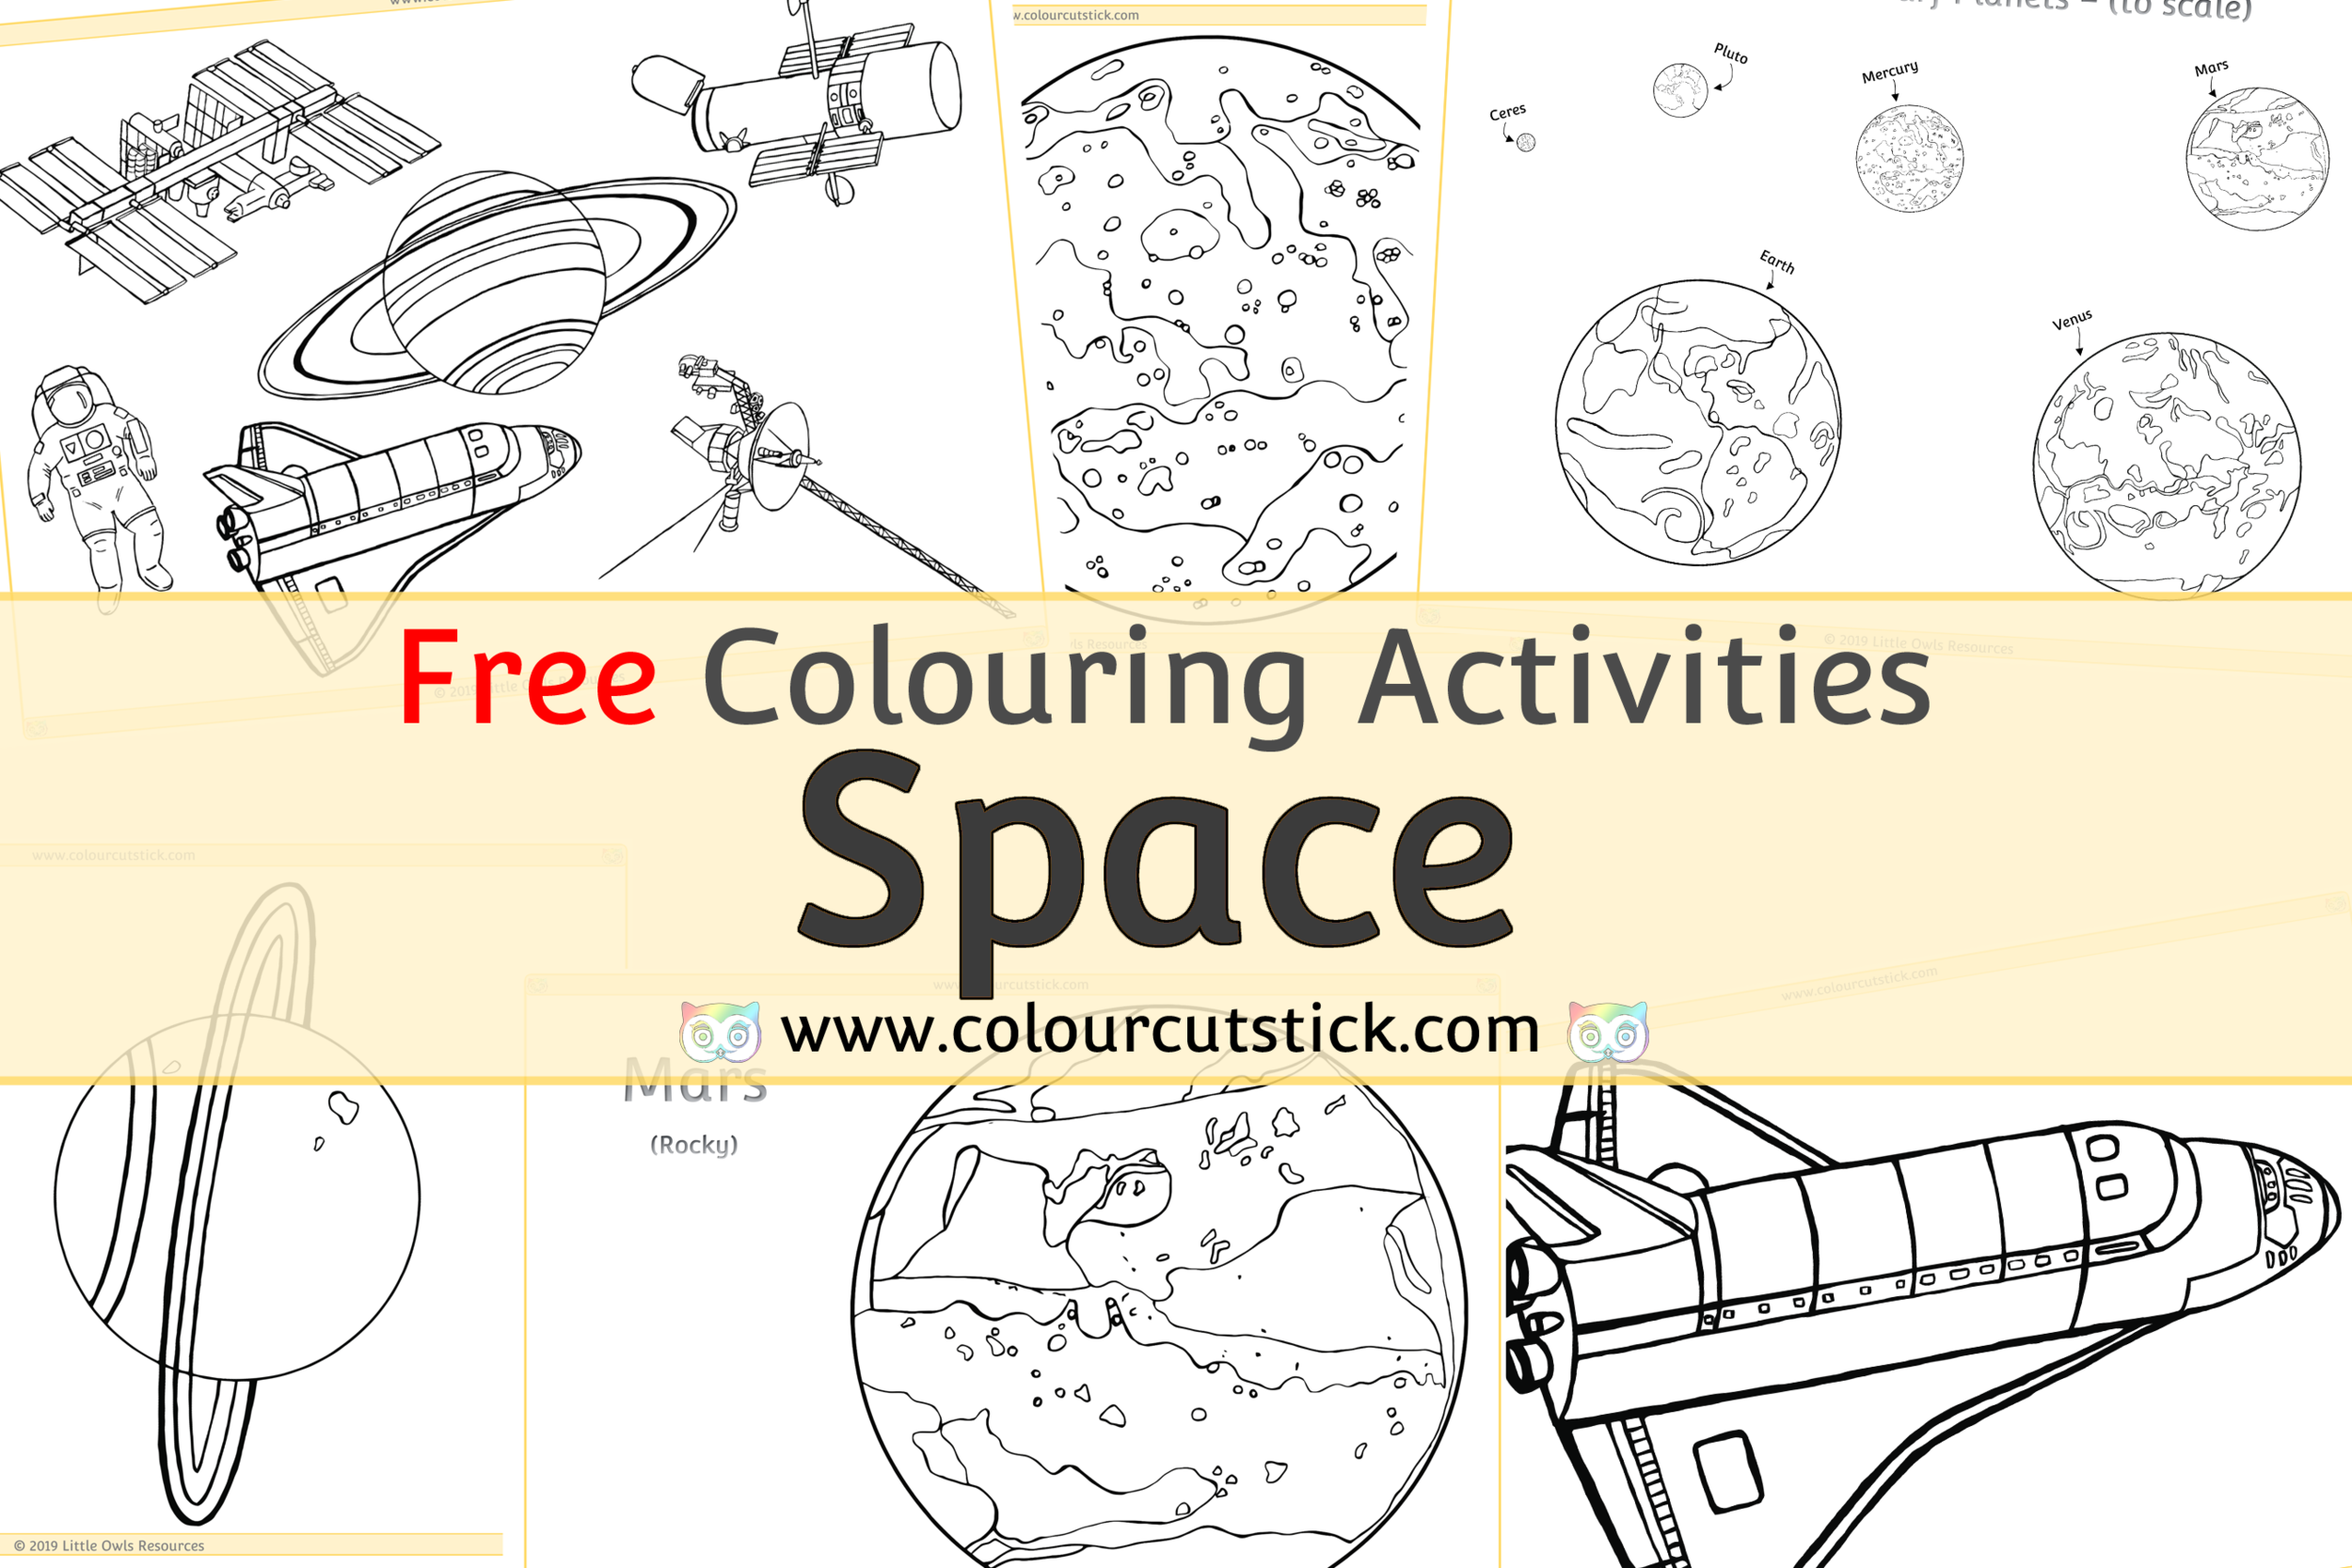 Free space colouringcoloring pages